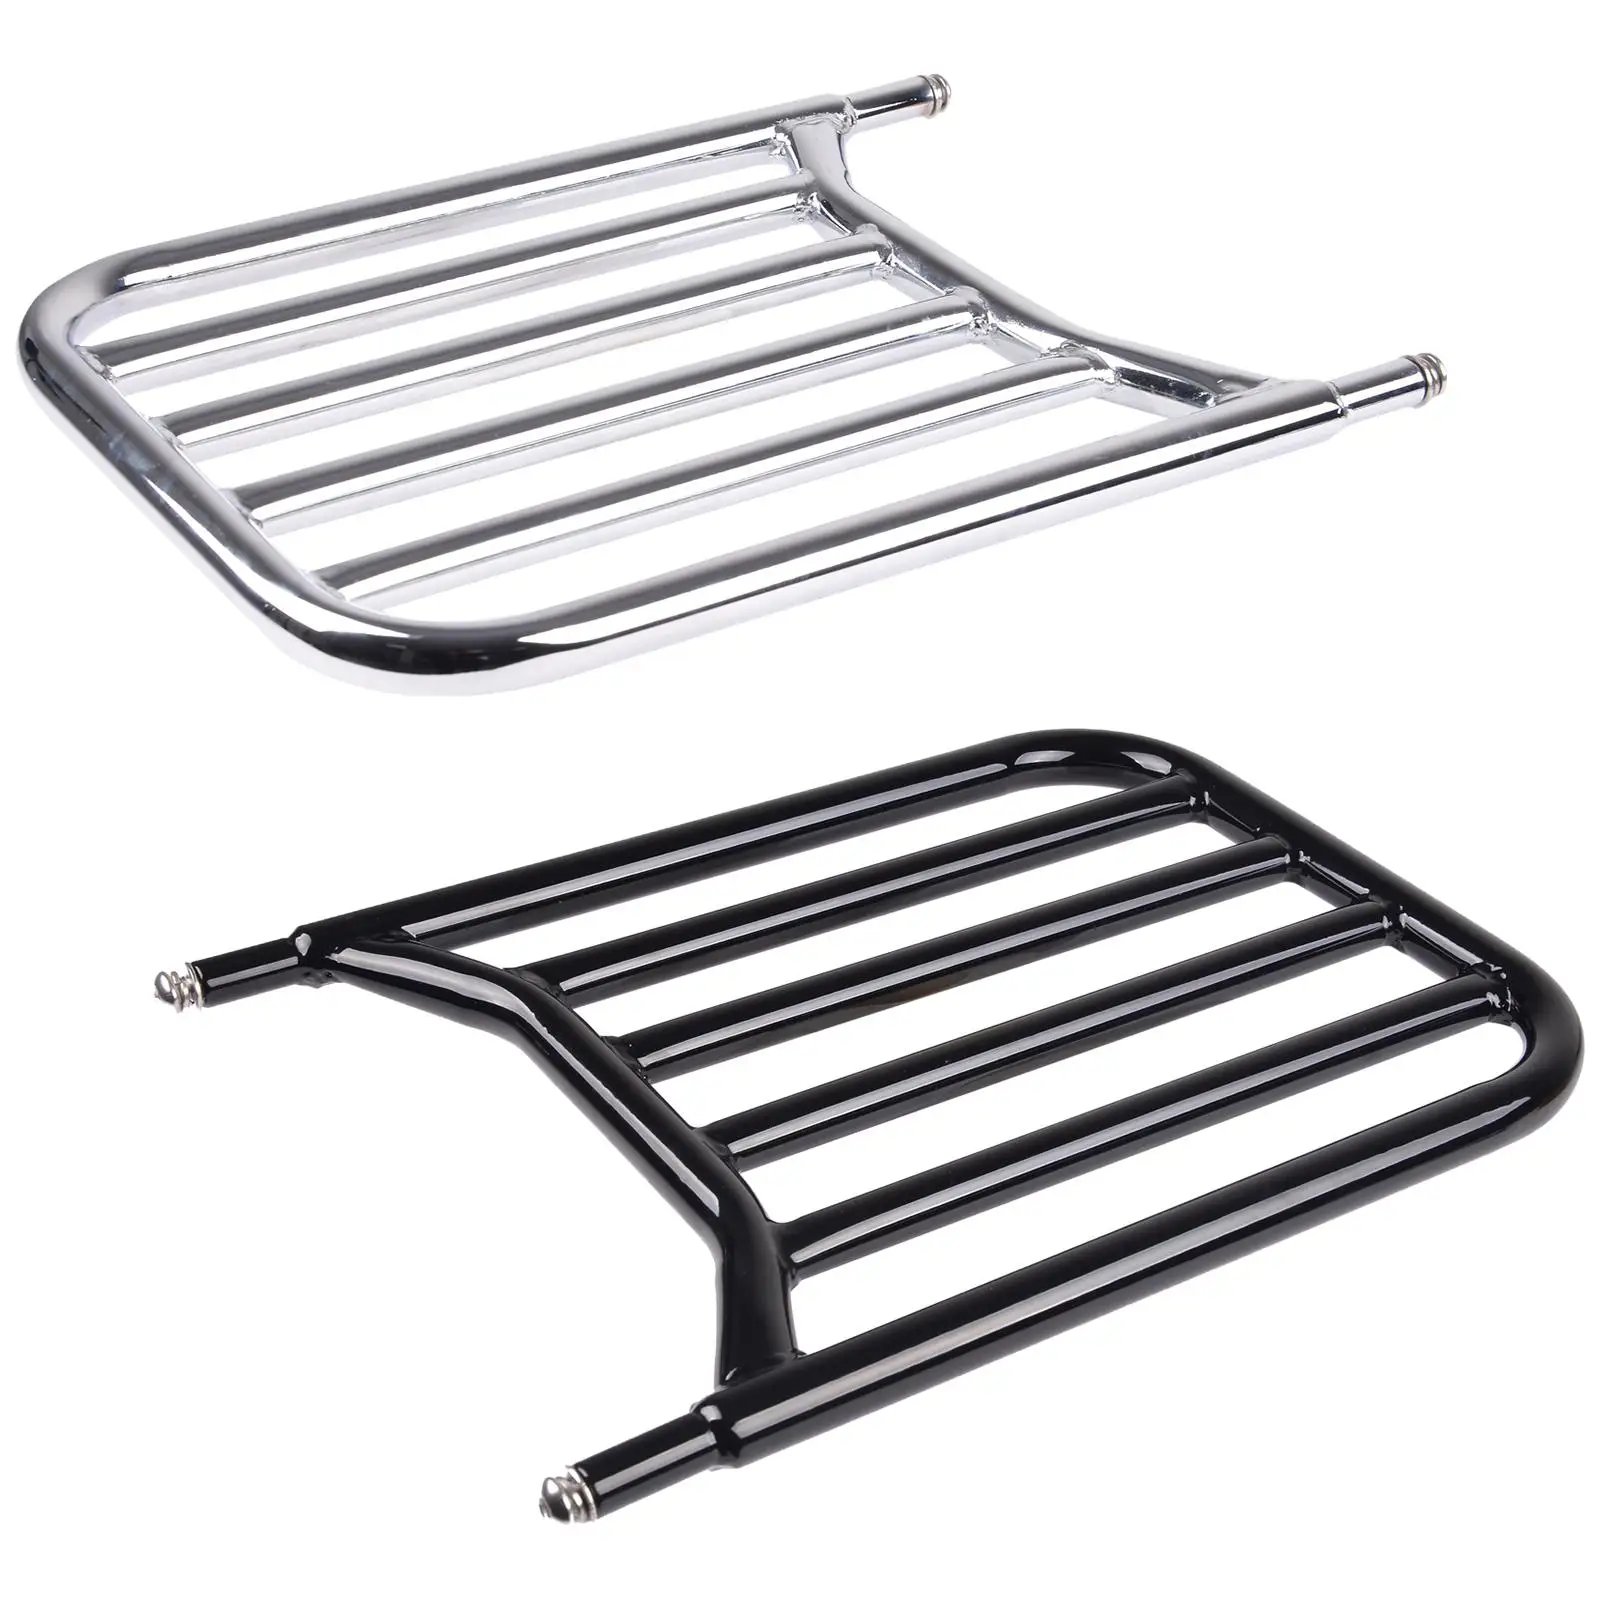 Rear Backrest Sissy Bar Accessories Cargo Carrier Luggage Rack Fit for Indian Chieftain 2014-2021